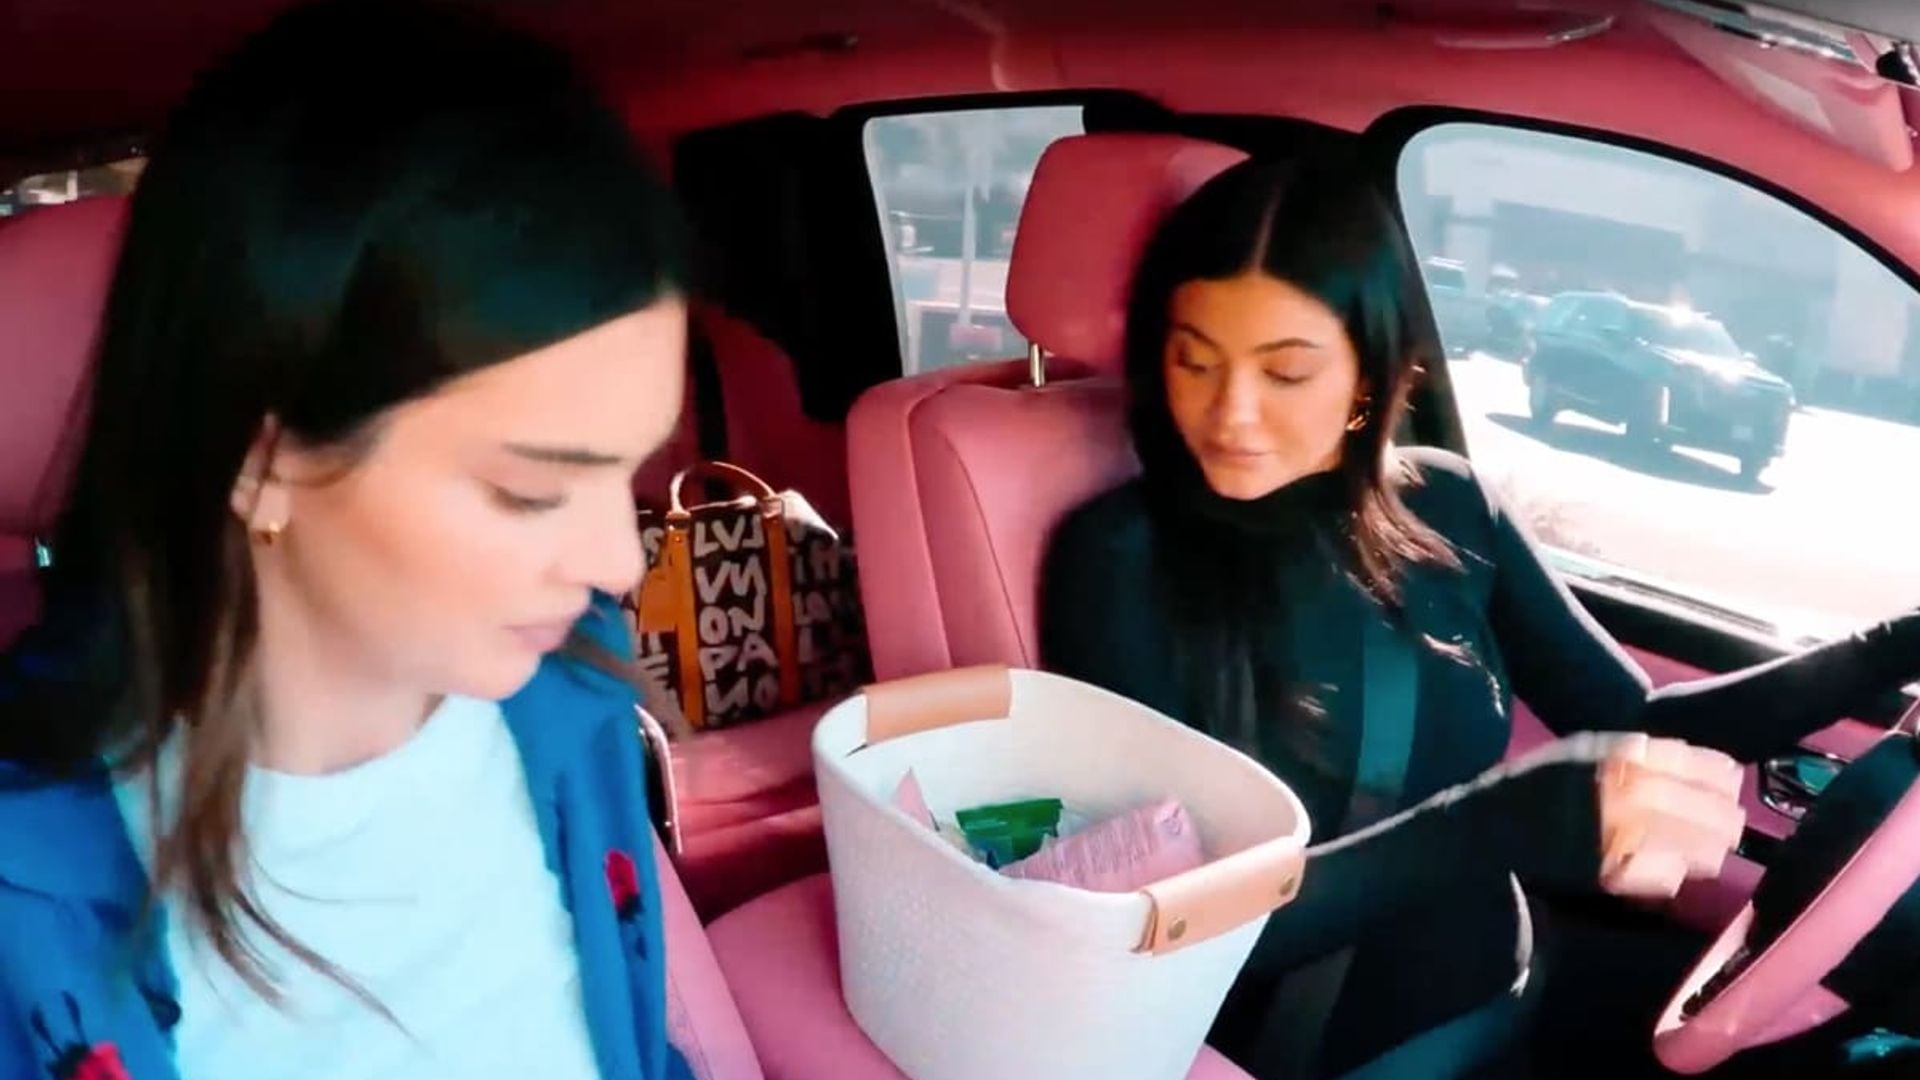 Kylie Jenner had a basket full of snacks in her car to satisfy her pregnancy cravings